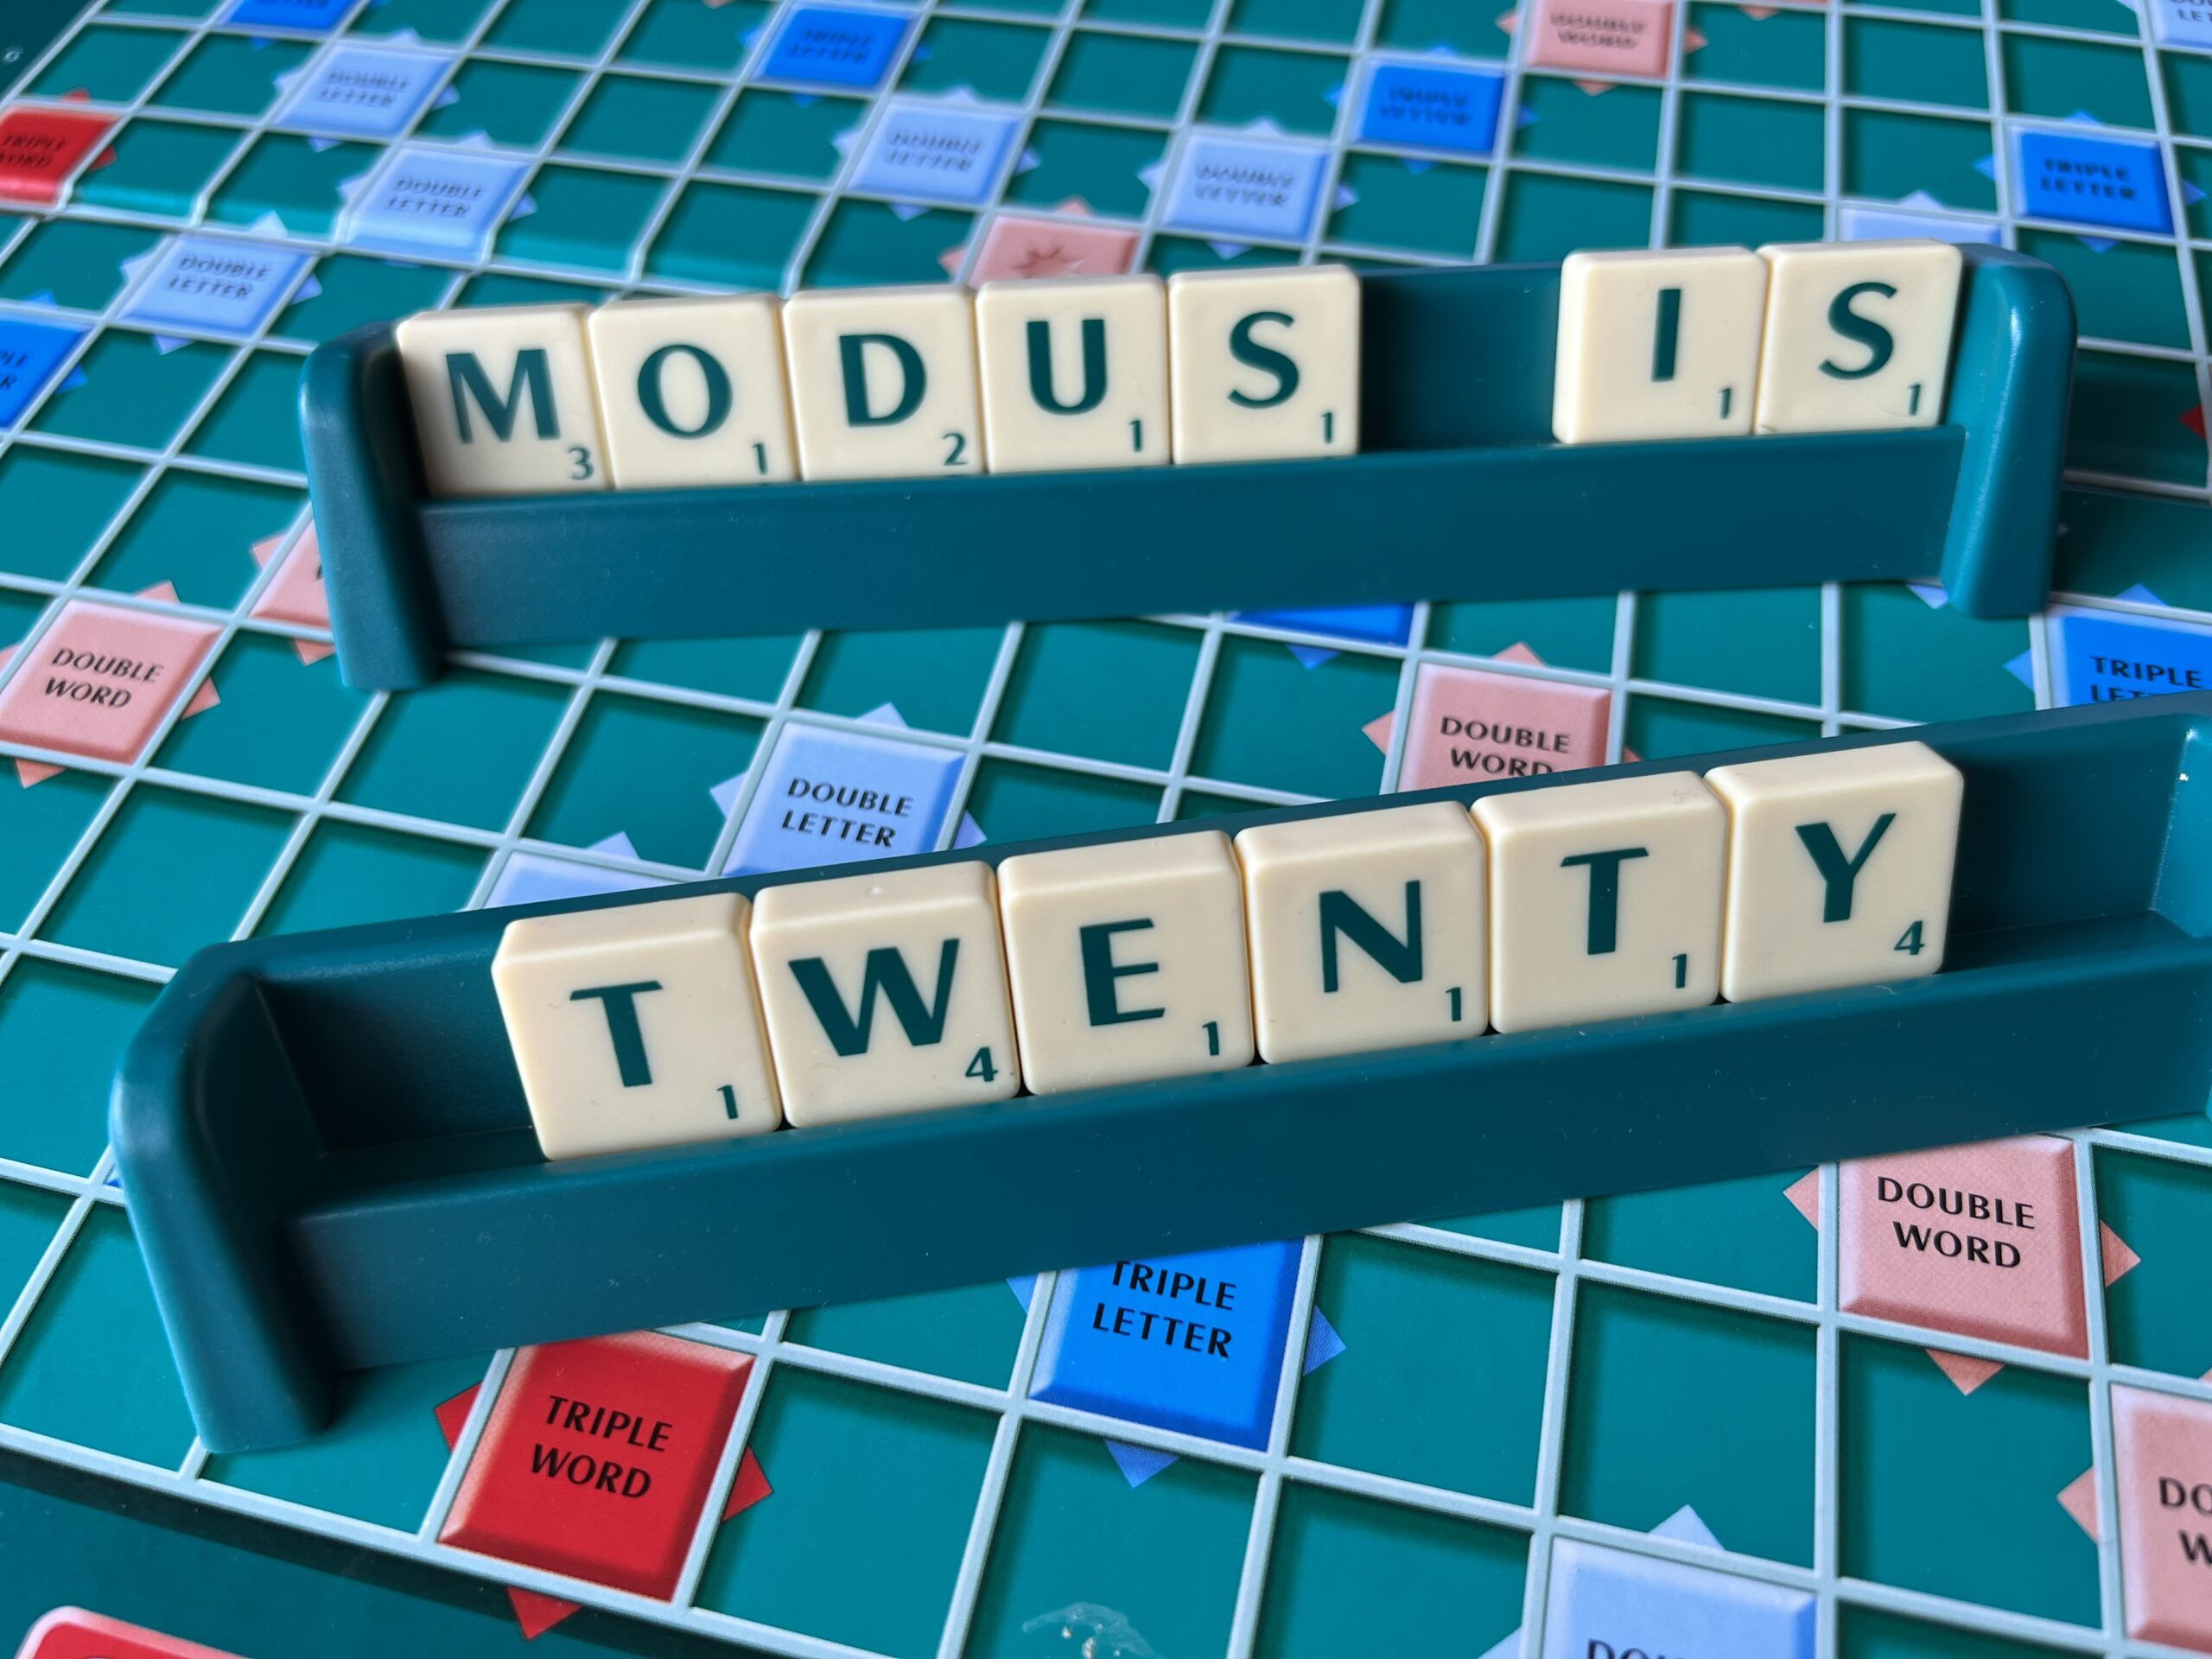 Modus is 20